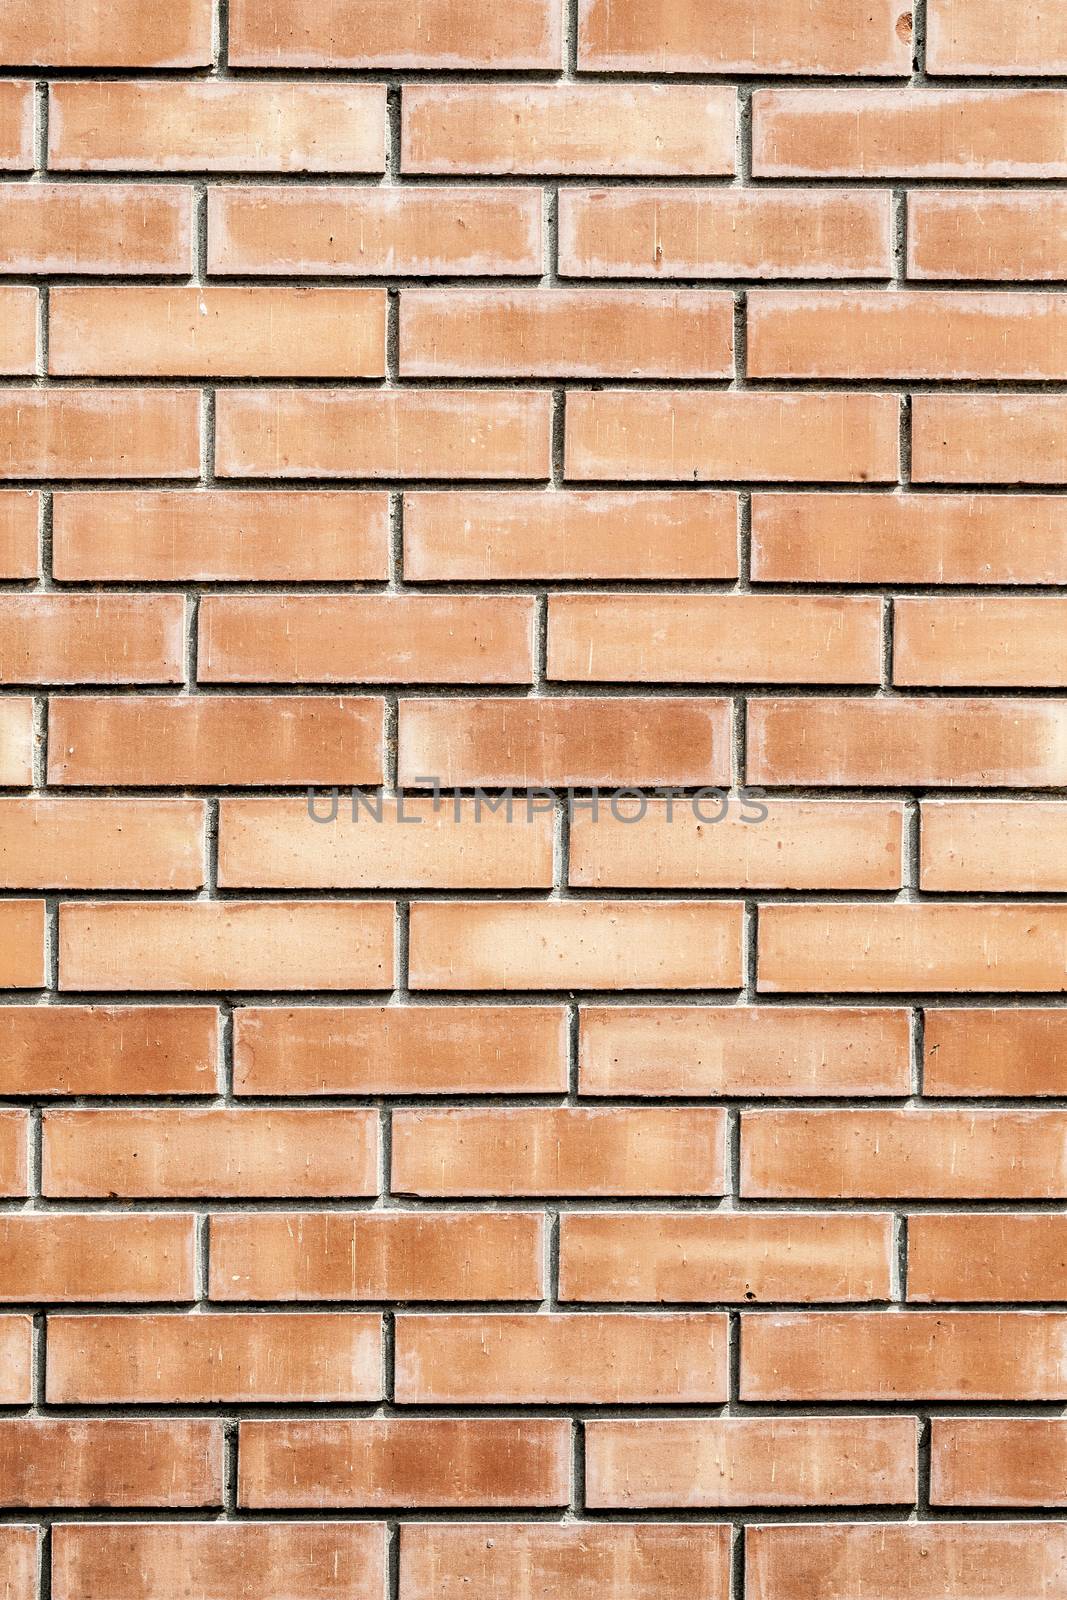 The old grunge red brick wall background